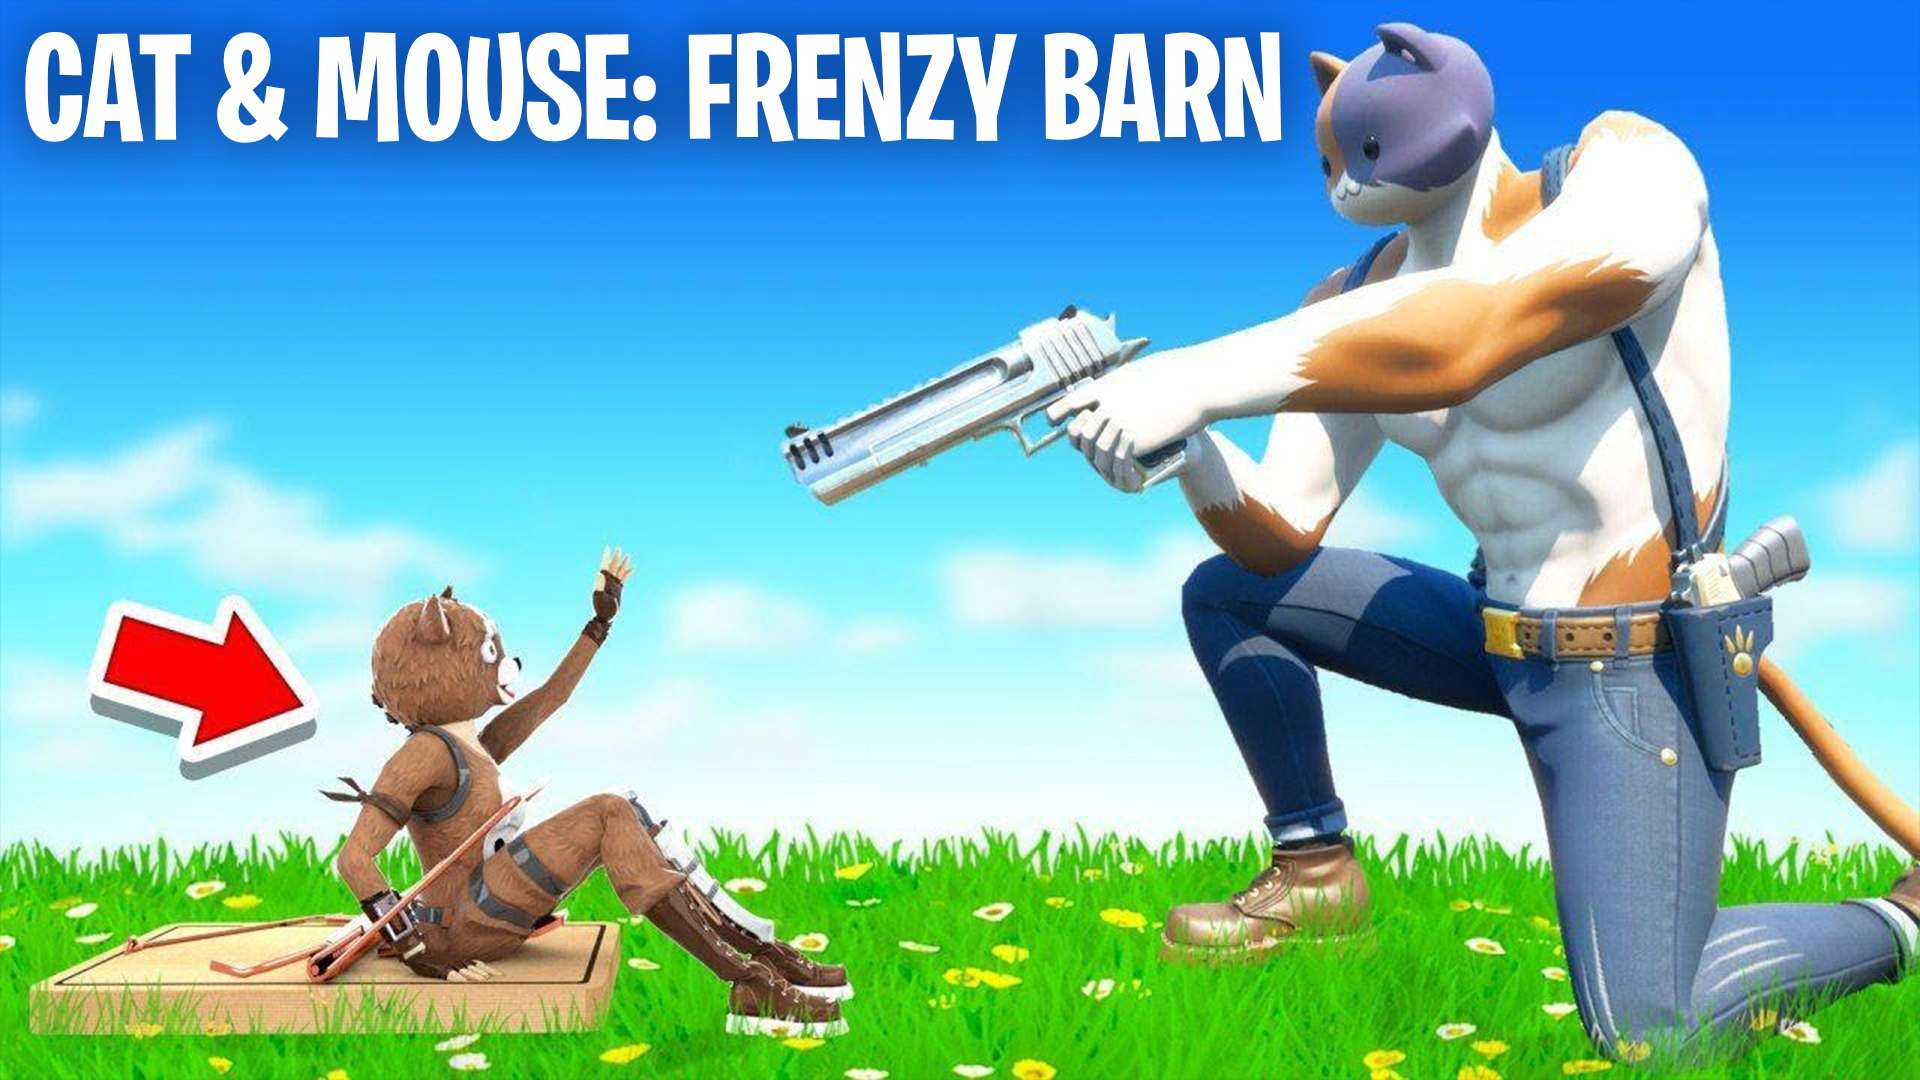 CAT & MOUSE: FRENZY BARN